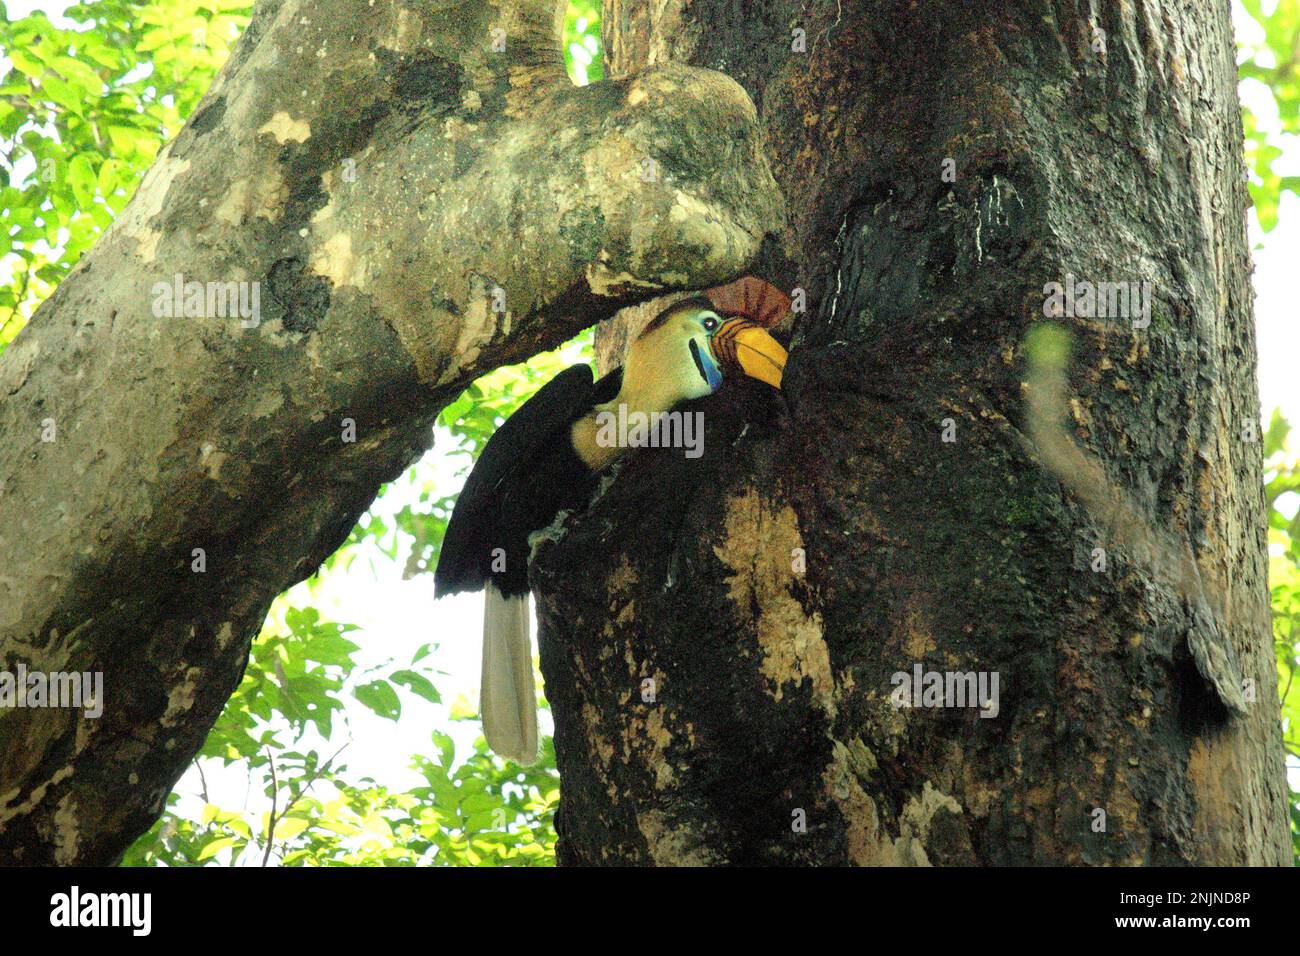 A male knobbed hornbill, or sometimes called Sulawesi wrinkled hornbill (Rhyticeros cassidix), is feeding a chick that is waiting inside a nest, through a crack on a tree in Tangkoko Nature Reserve, North Sulawesi, Indonesia. Due to their dependency on forest and certain types of trees, hornbills in general are threatened by climate change. 'There is rapidly growing evidence for the negative effects of high temperatures on the behavior, physiology, breeding, and survival of various bird, mammal, and reptile species around the world,' said Dr. Nicholas Pattinson (University of Cape Town). Stock Photo